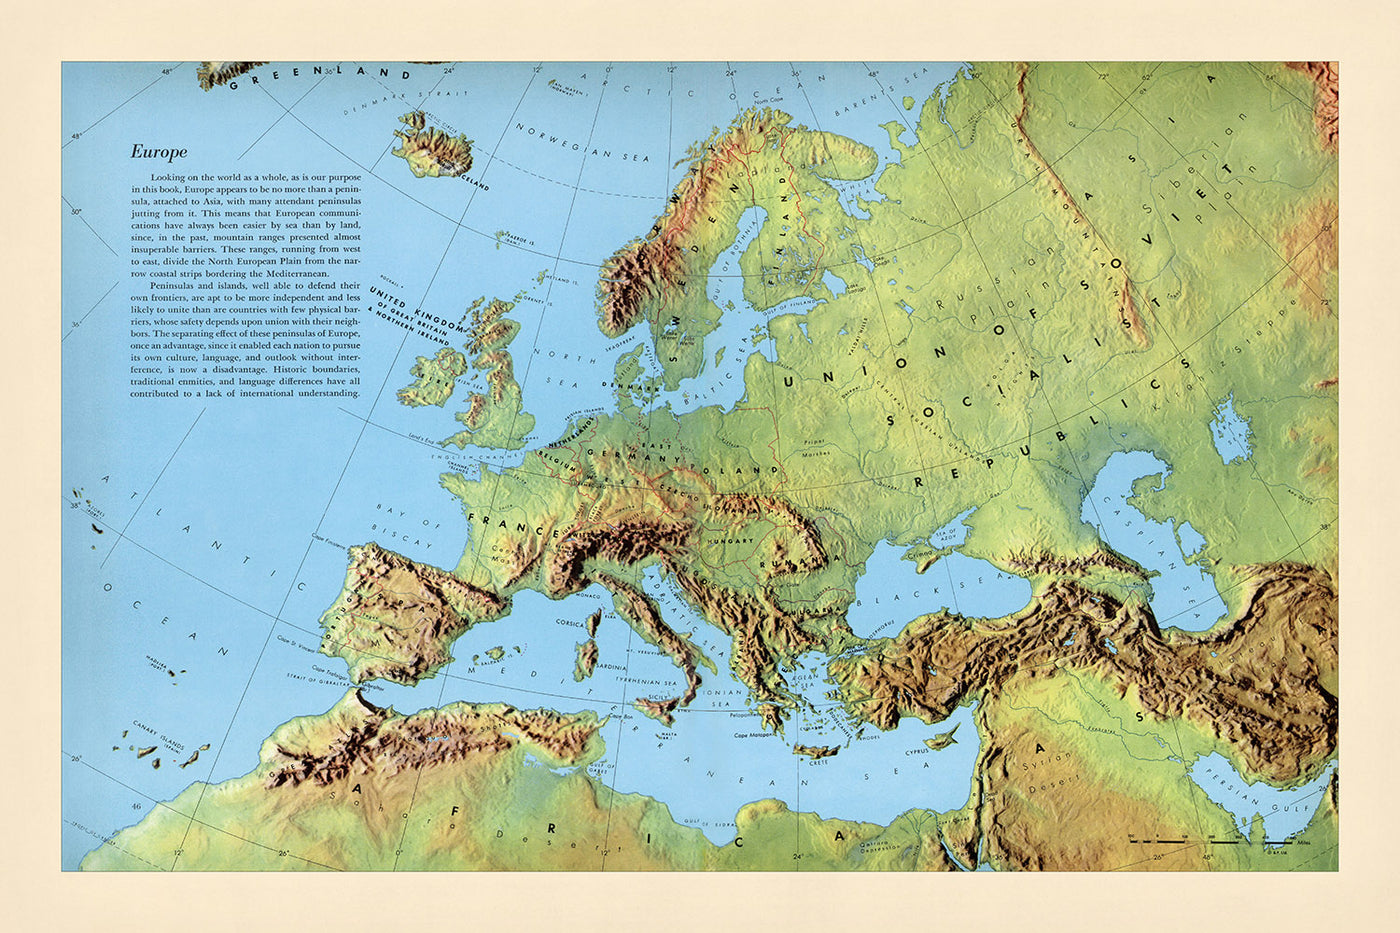 Old Shadow Relief Map of Europe by Debenham, 1958: Detailed Physical Map, Political Boundaries, Mountain Ranges